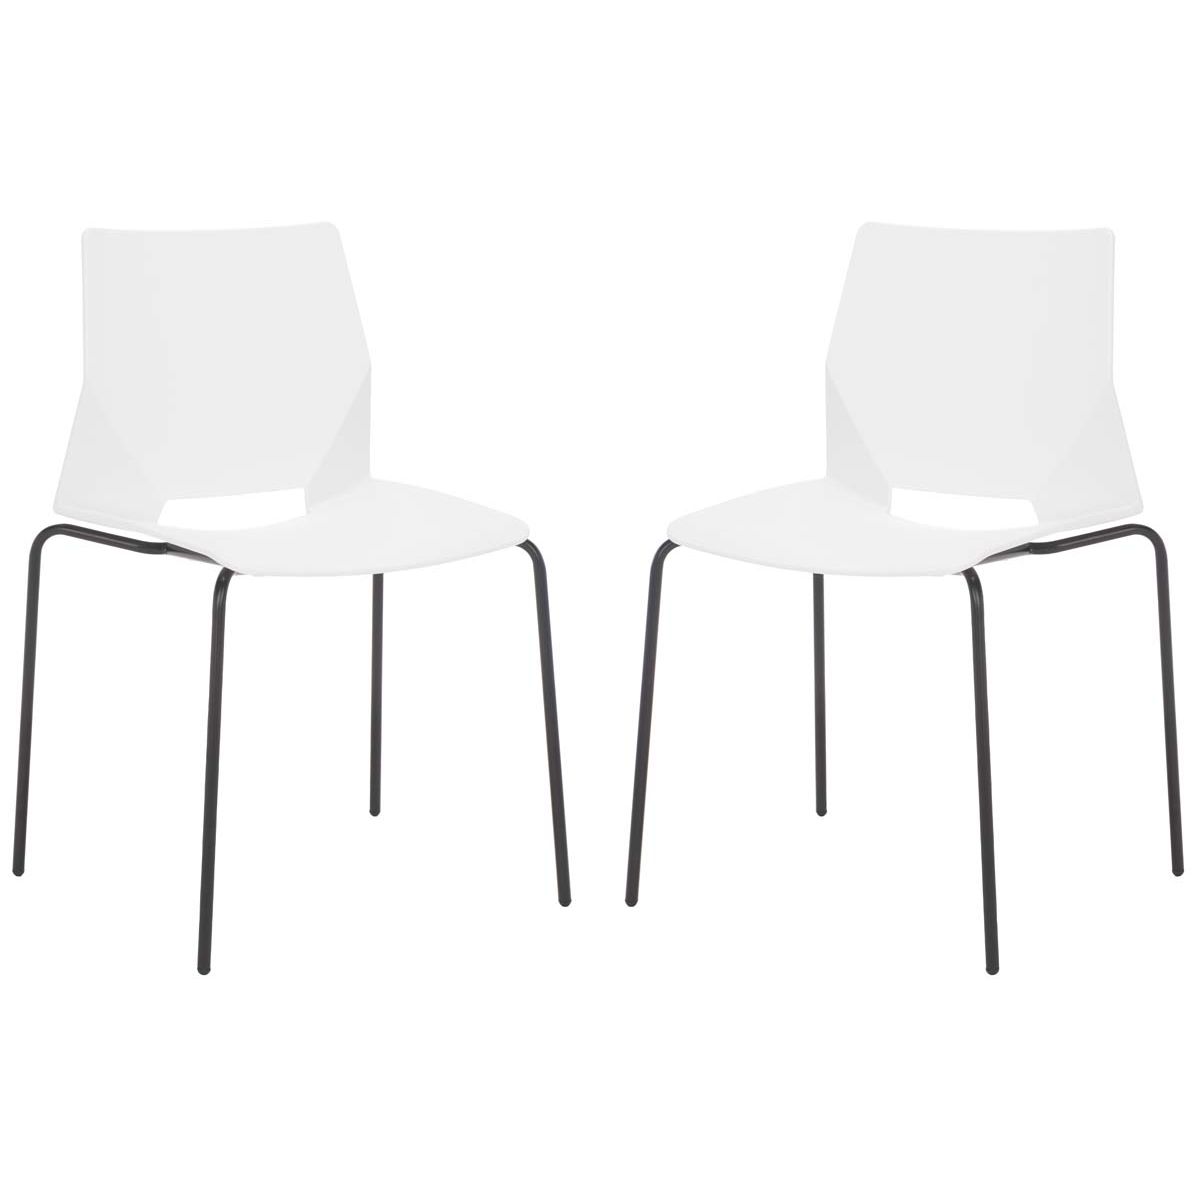 Safavieh Couture Nellie Dining Chairs (Set of 2)